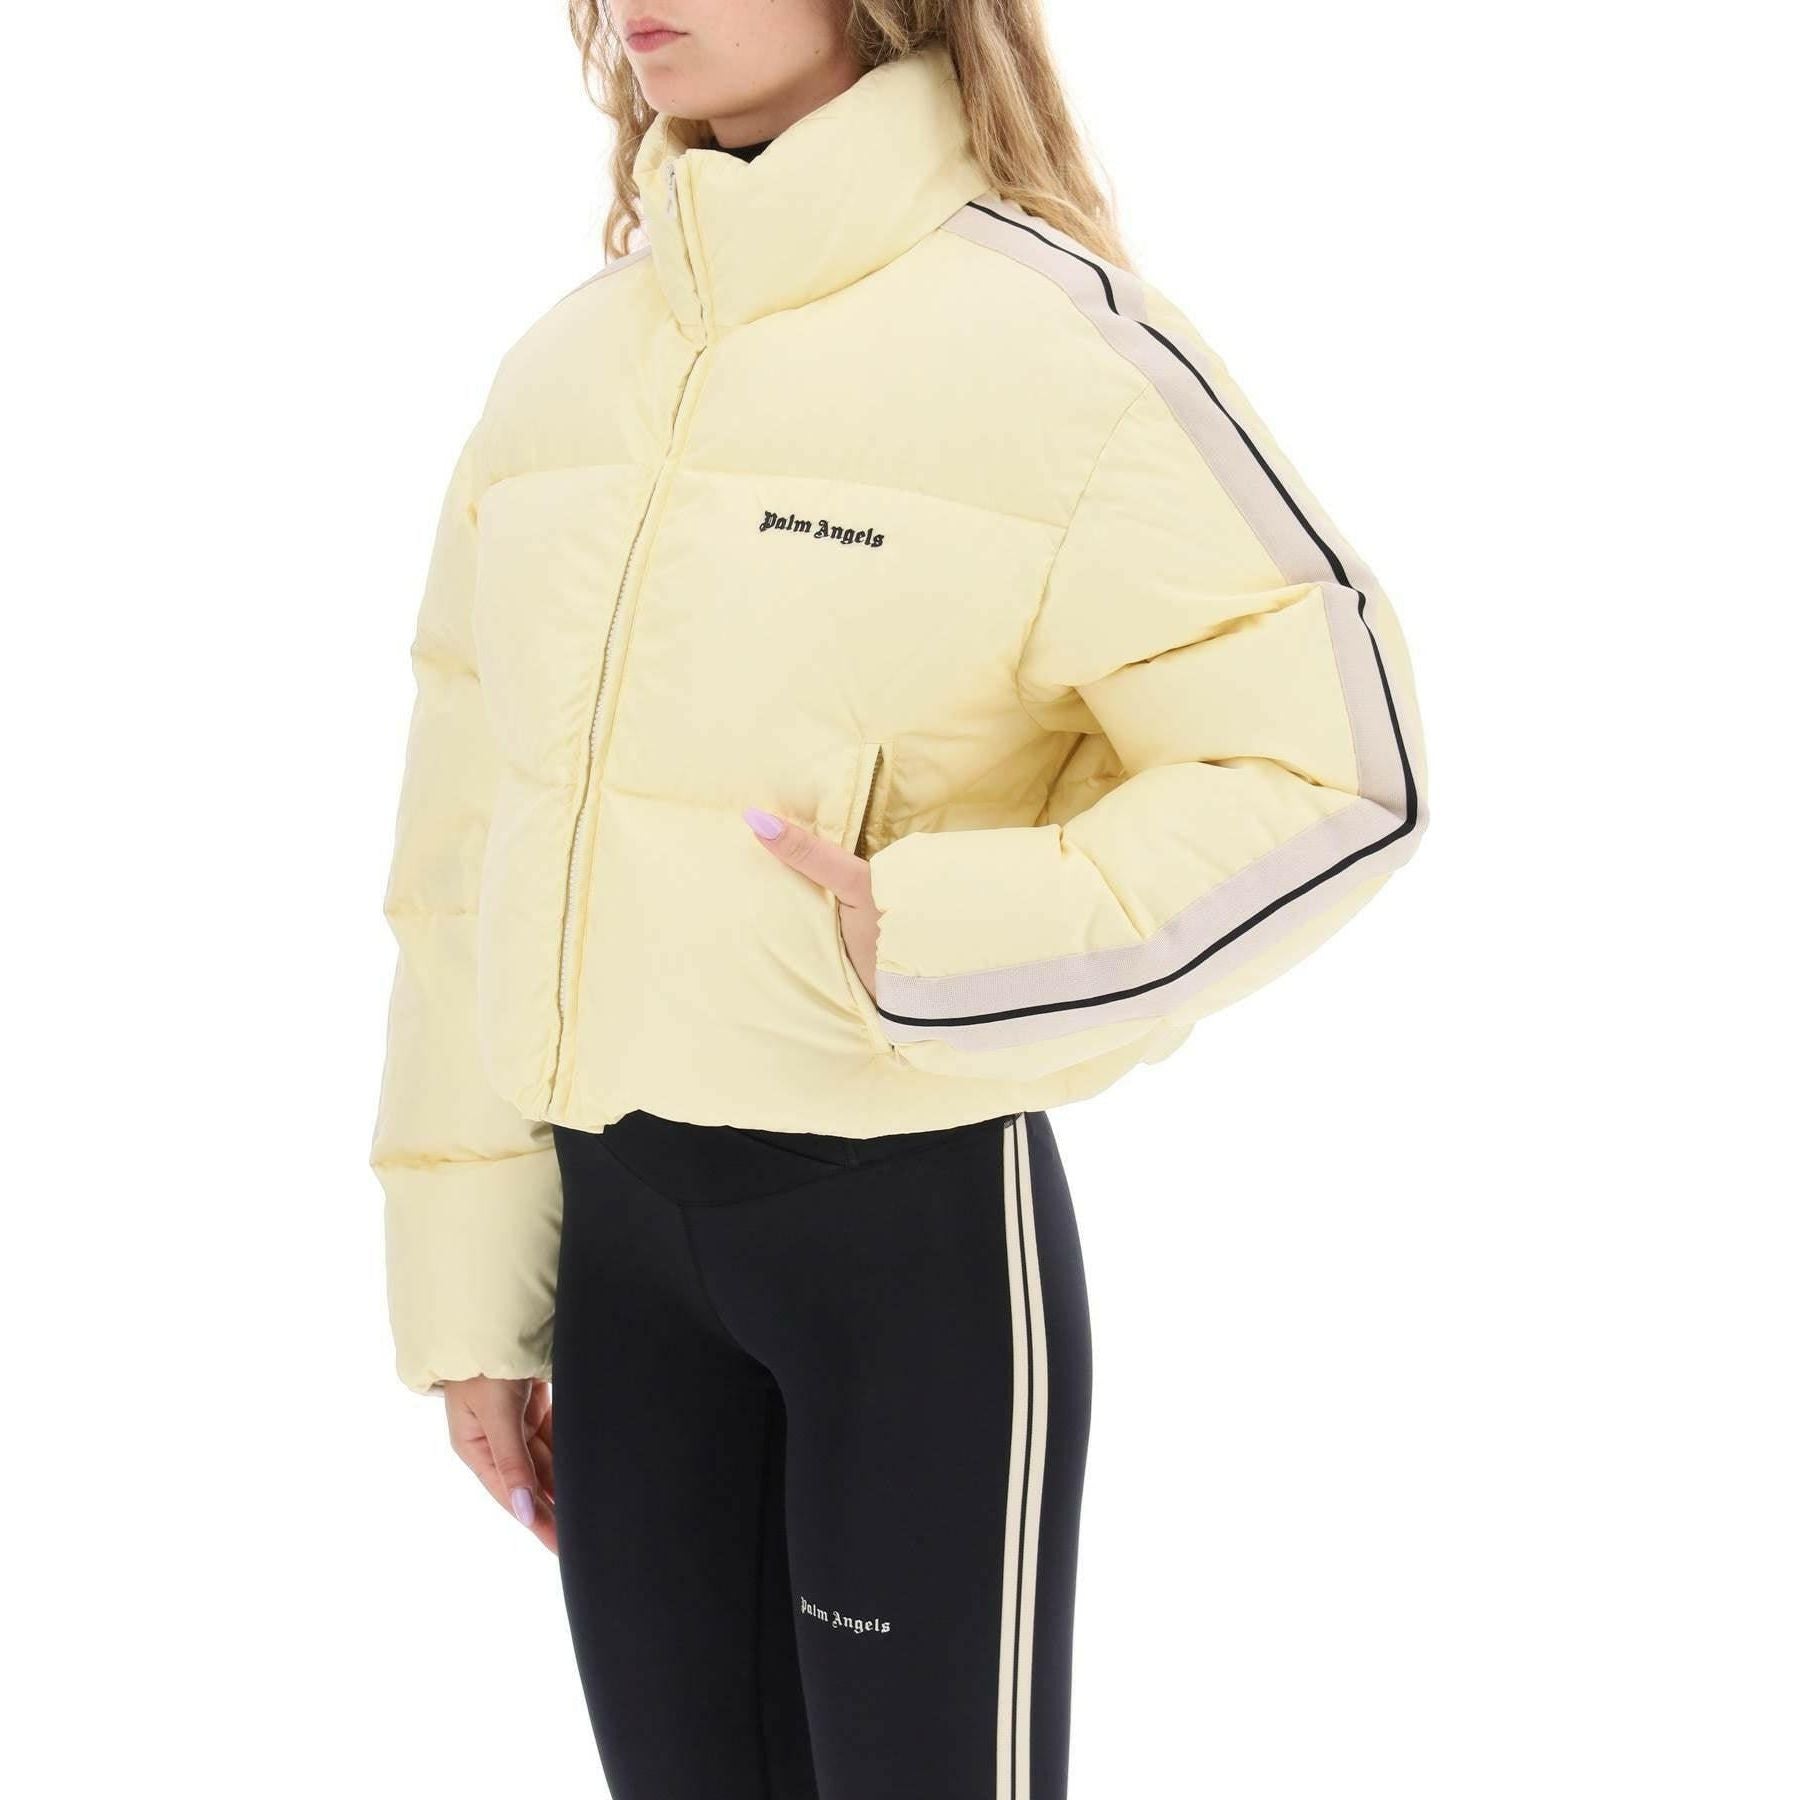 Cropped Puffer Jacket With Bands On Sleeves PALM ANGELS JOHN JULIA.